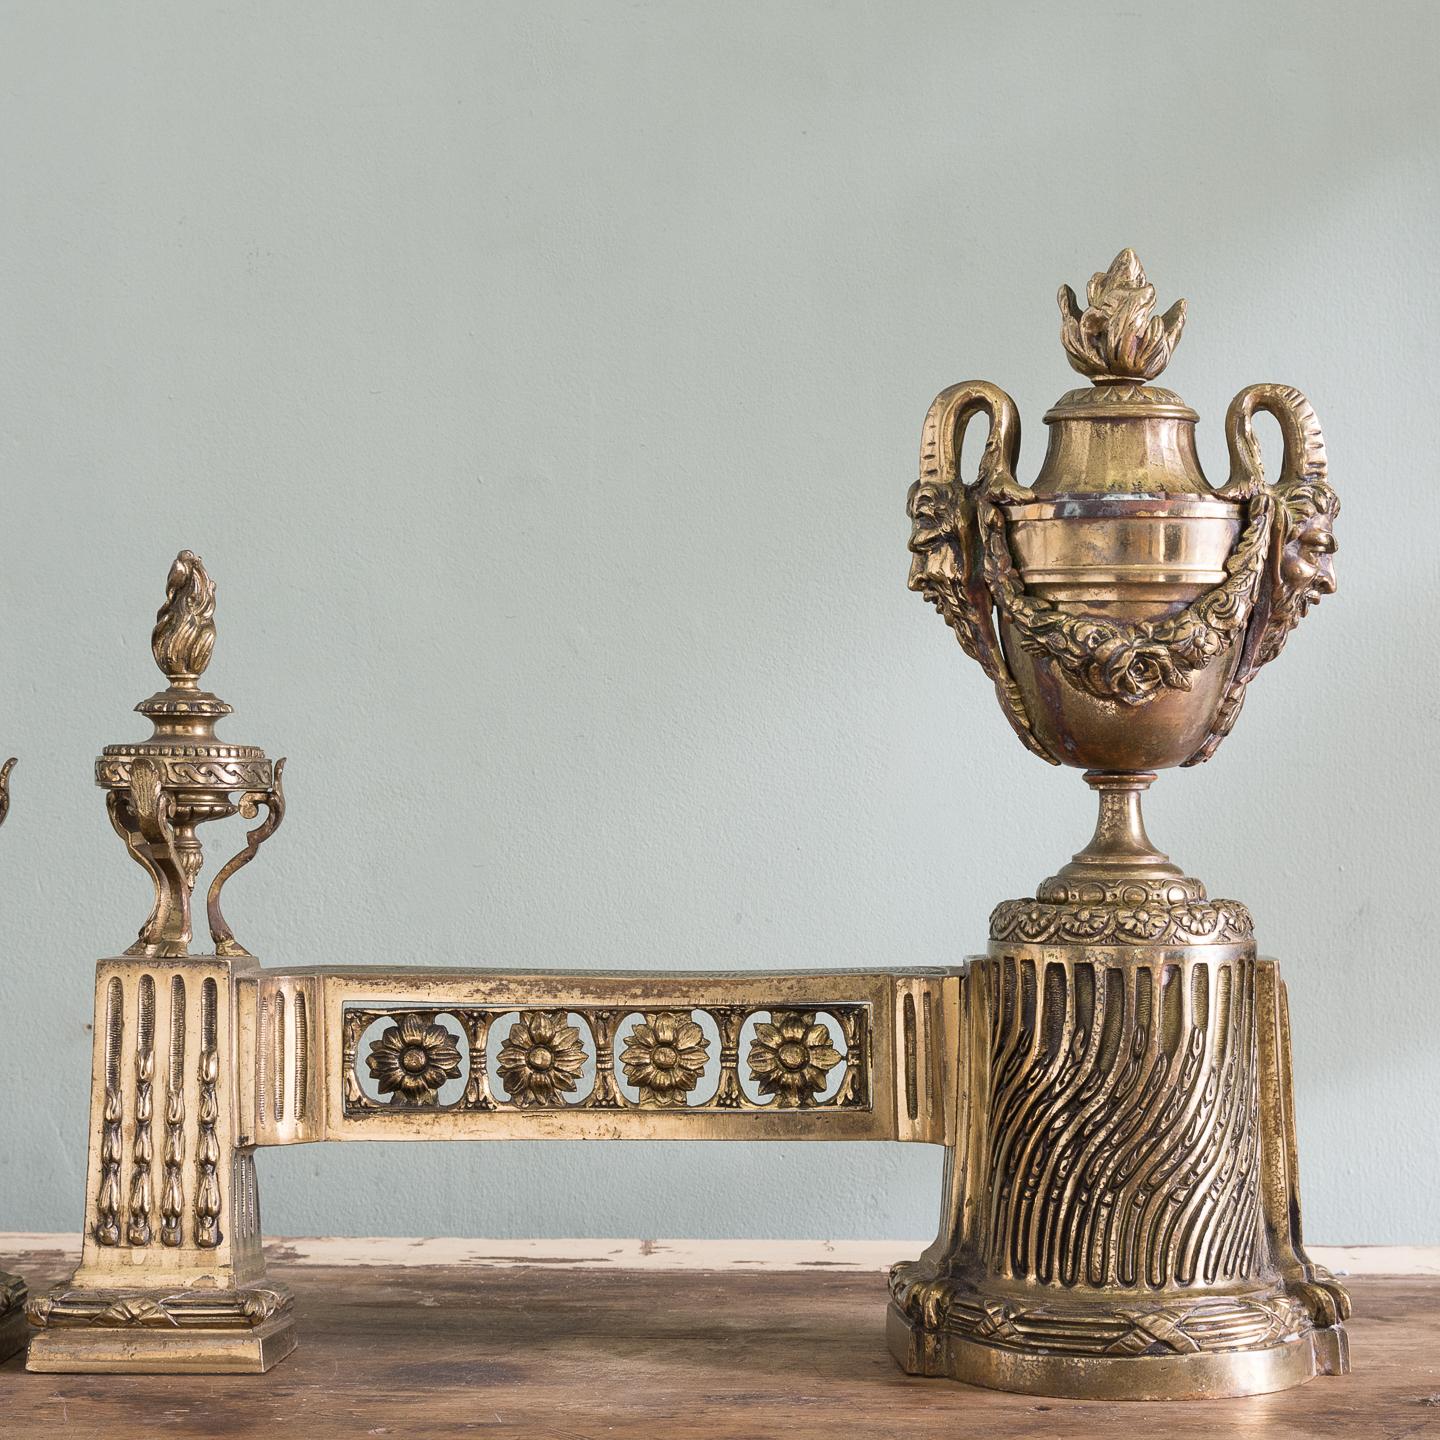 A pair of 19th century French chenets, gilded bronze, in the neoclassical taste, each with large flaming classical urn with Satyr mask handles with garlands hung between, raised on strigilated plinth, the horizontal supports with paterae details